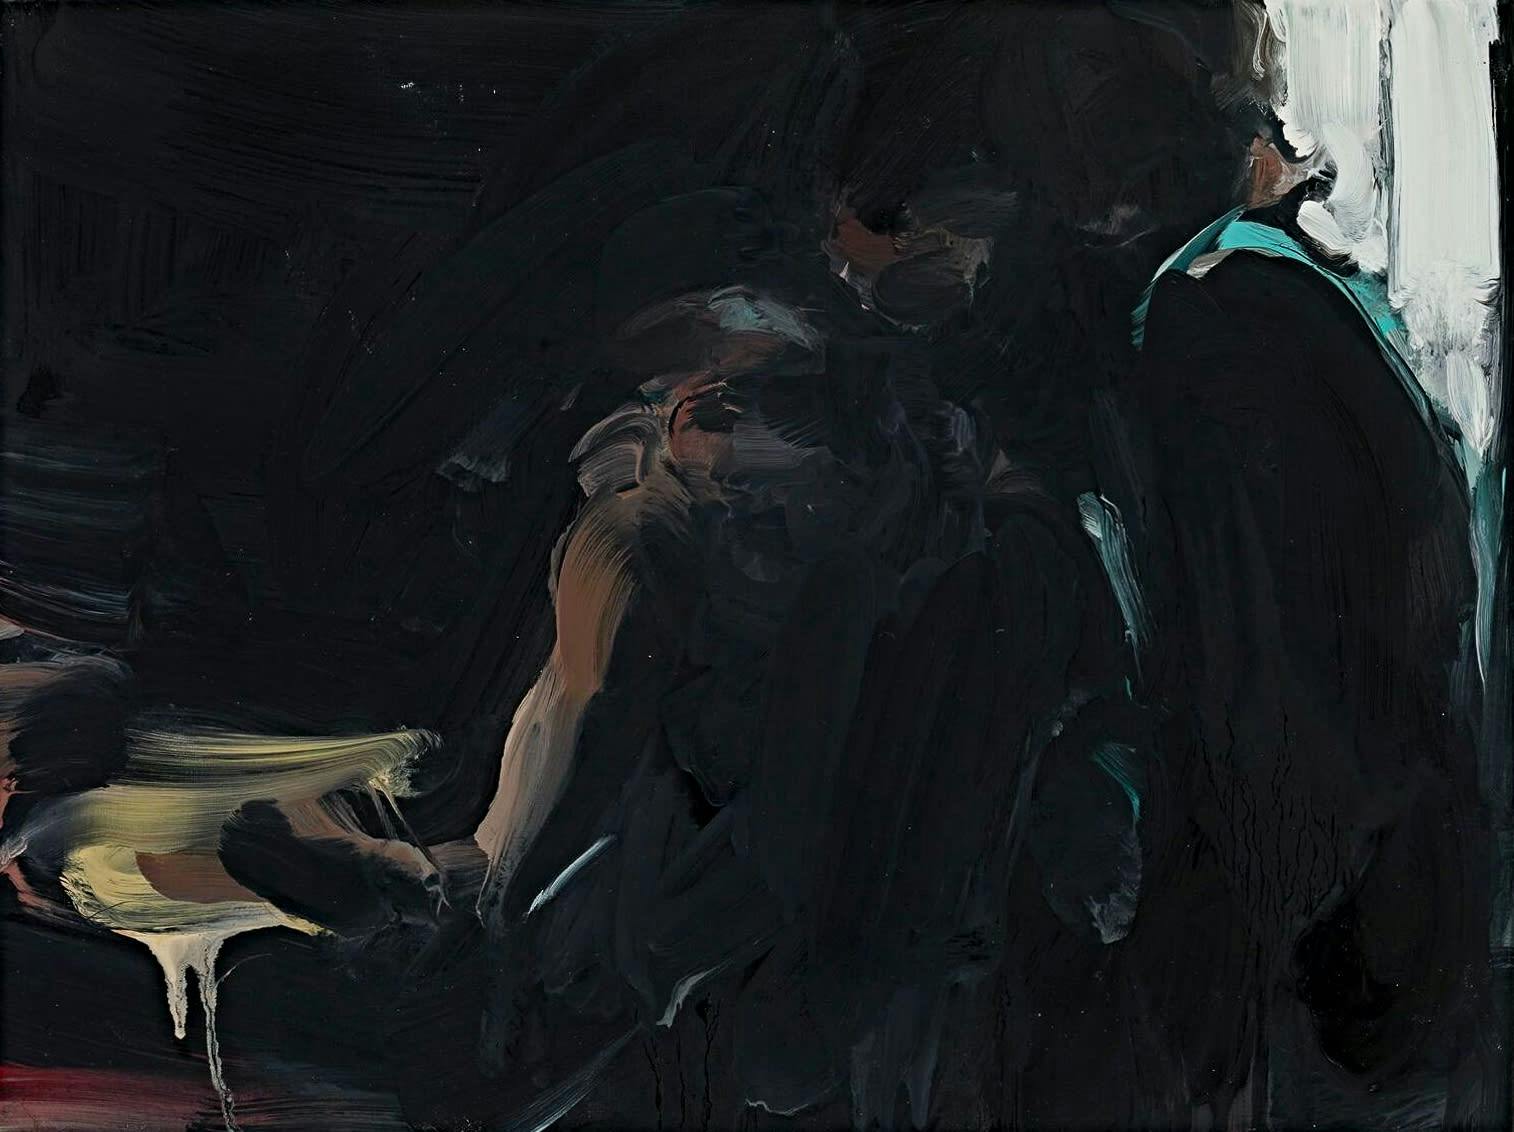 A painting by Laura Lancaster of two figures in a darkened room, one appears to be holding a flame or torch 